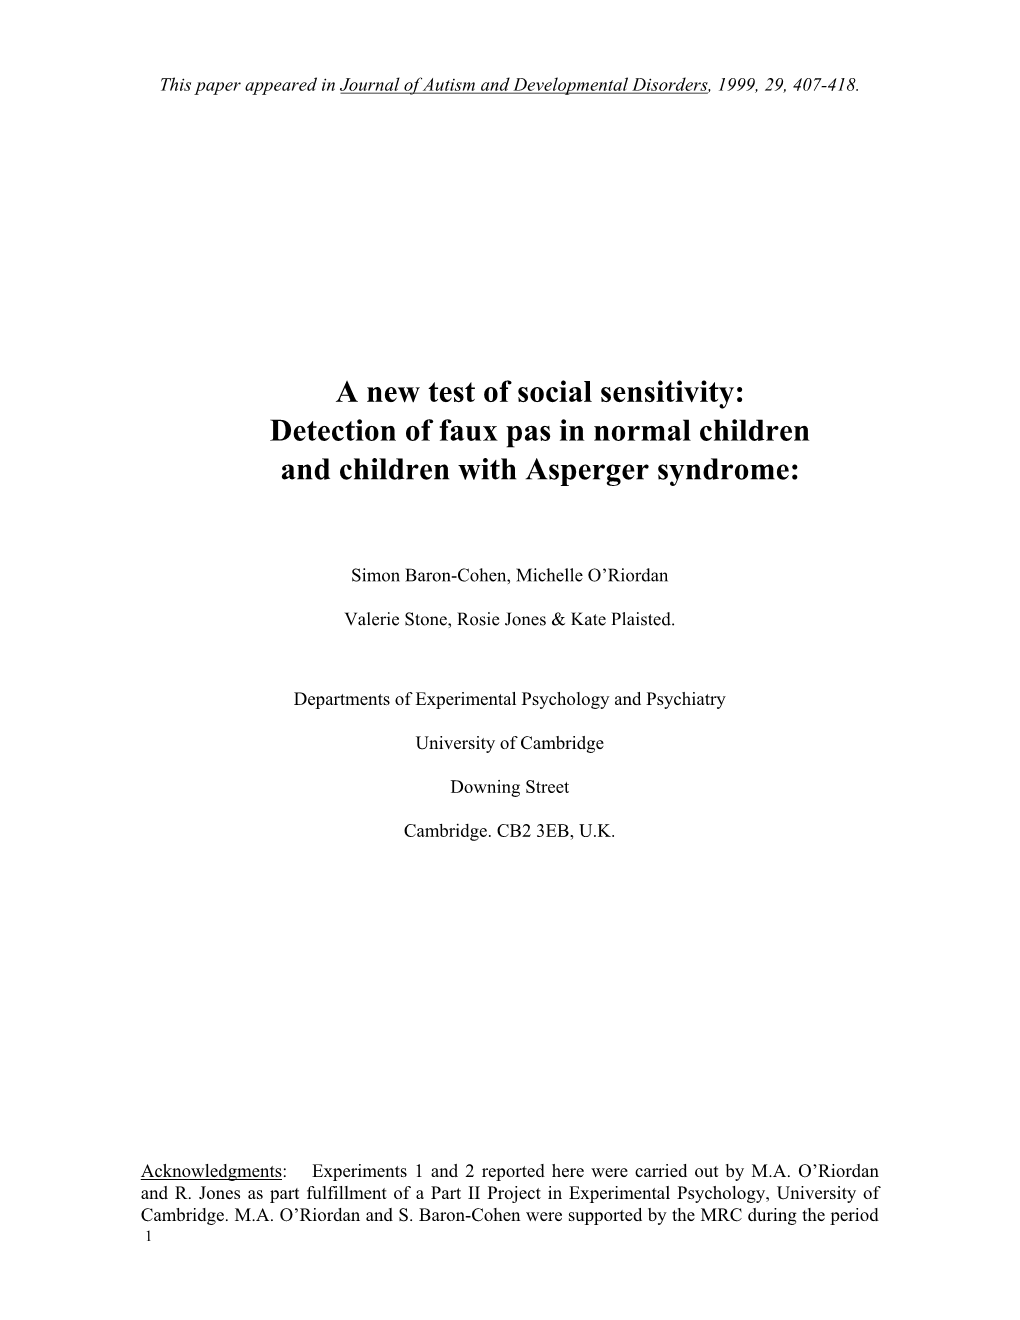 A New Test of Social Sensitivity: Detection of Faux Pas in Normal Children and Children with Asperger Syndrome